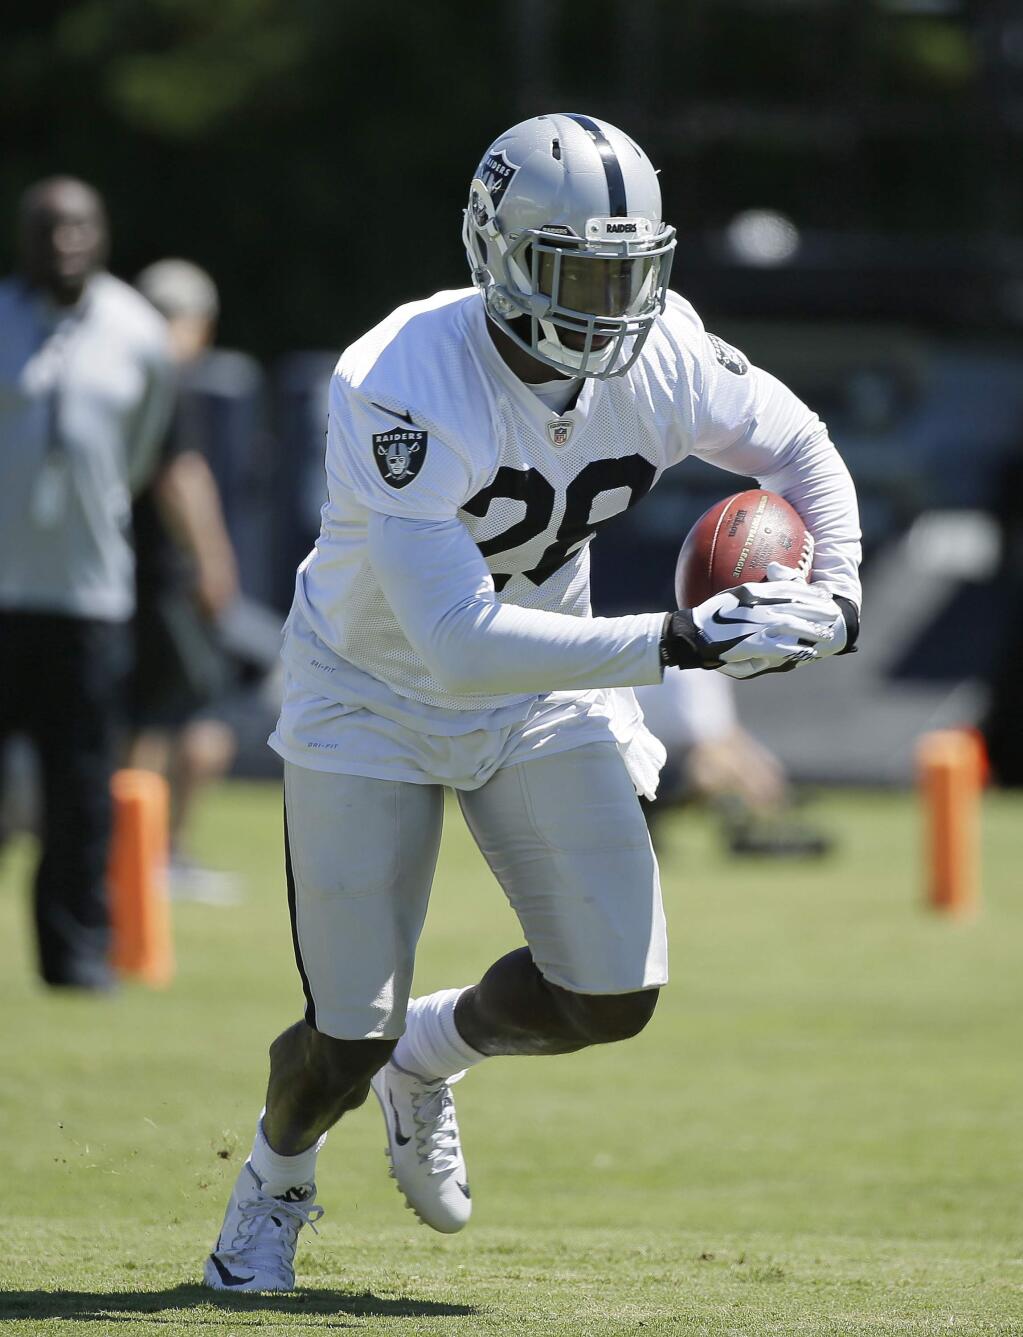 In this July 30, 2016 file photo, Oakland Raiders running back Latavius Murray runs with the ball during practice at training camp in Napa. Murray is counting on more help at running back leading to more big runs of his own this season for the Raiders. (AP Photo/Eric Risberg, File)